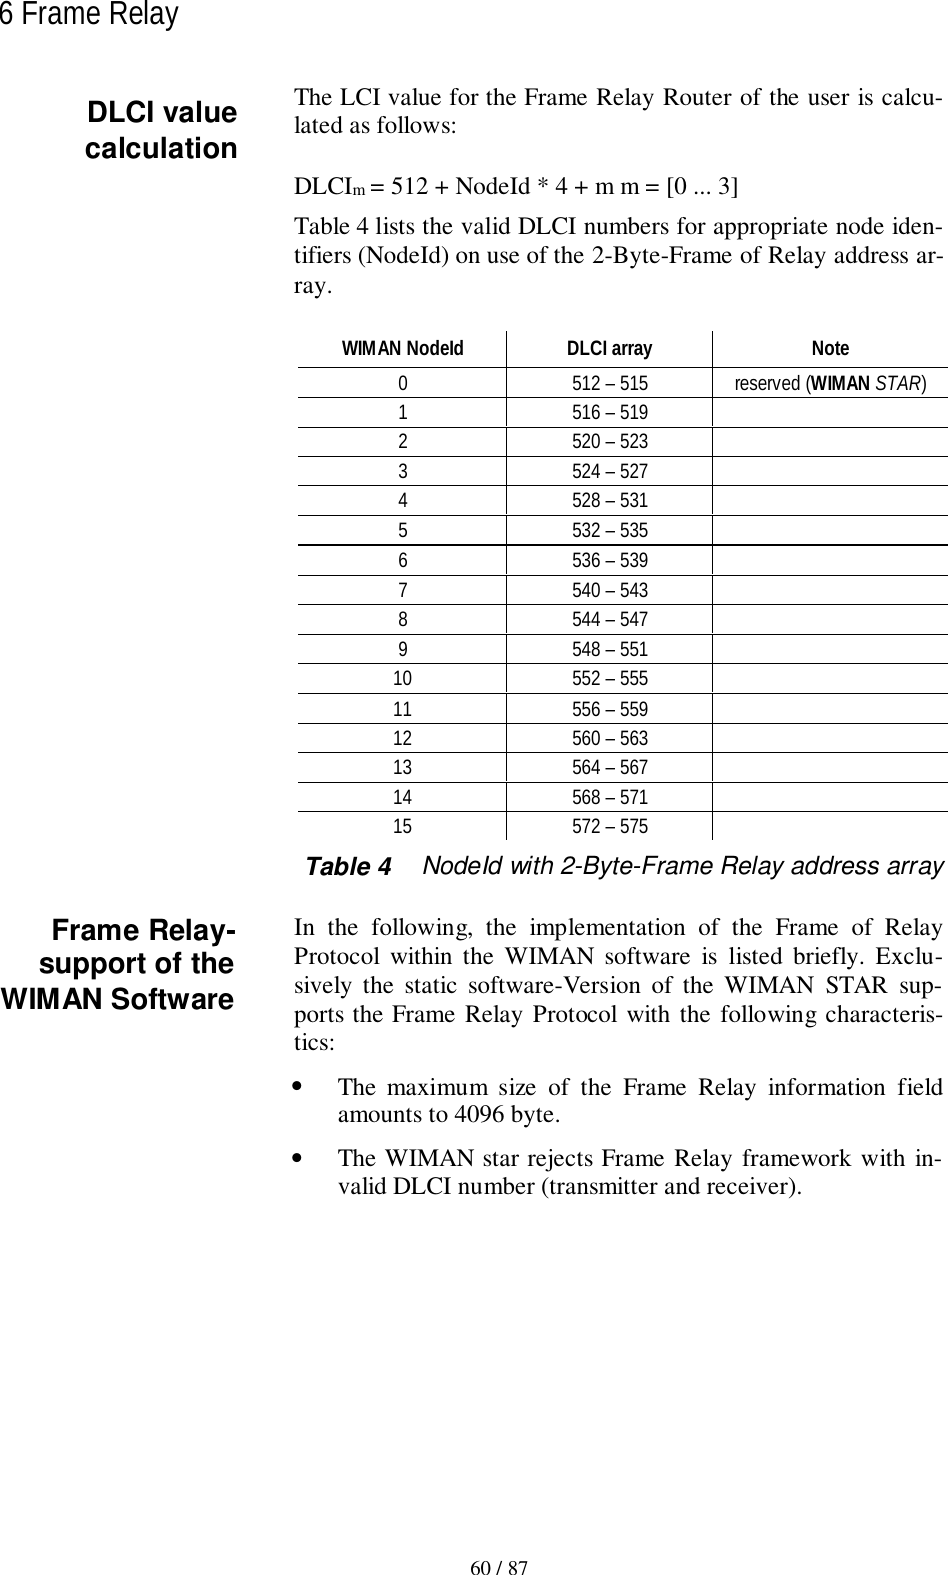 60 / 876 Frame RelayThe LCI value for the Frame Relay Router of the user is calcu-lated as follows:DLCIm = 512 + NodeId * 4 + m m = [0 ... 3]Table 4 lists the valid DLCI numbers for appropriate node iden-tifiers (NodeId) on use of the 2-Byte-Frame of Relay address ar-ray.WIMAN NodeId DLCI array Note0 512 – 515 reserved (WIMAN STAR)1 516 – 5192 520 – 5233 524 – 5274 528 – 5315 532 – 5356 536 – 5397 540 – 5438 544 – 5479 548 – 55110 552 – 55511 556 – 55912 560 – 56313 564 – 56714 568 – 57115 572 – 575Table 4 NodeId with 2-Byte-Frame Relay address arrayIn the following, the implementation of the Frame of RelayProtocol within the WIMAN software is listed briefly. Exclu-sively the static software-Version of the WIMAN STAR sup-ports the Frame Relay Protocol with the following characteris-tics:• The maximum size of the Frame Relay information fieldamounts to 4096 byte.• The WIMAN star rejects Frame Relay framework with in-valid DLCI number (transmitter and receiver).DLCI valuecalculationFrame Relay-support of theWIMAN Software